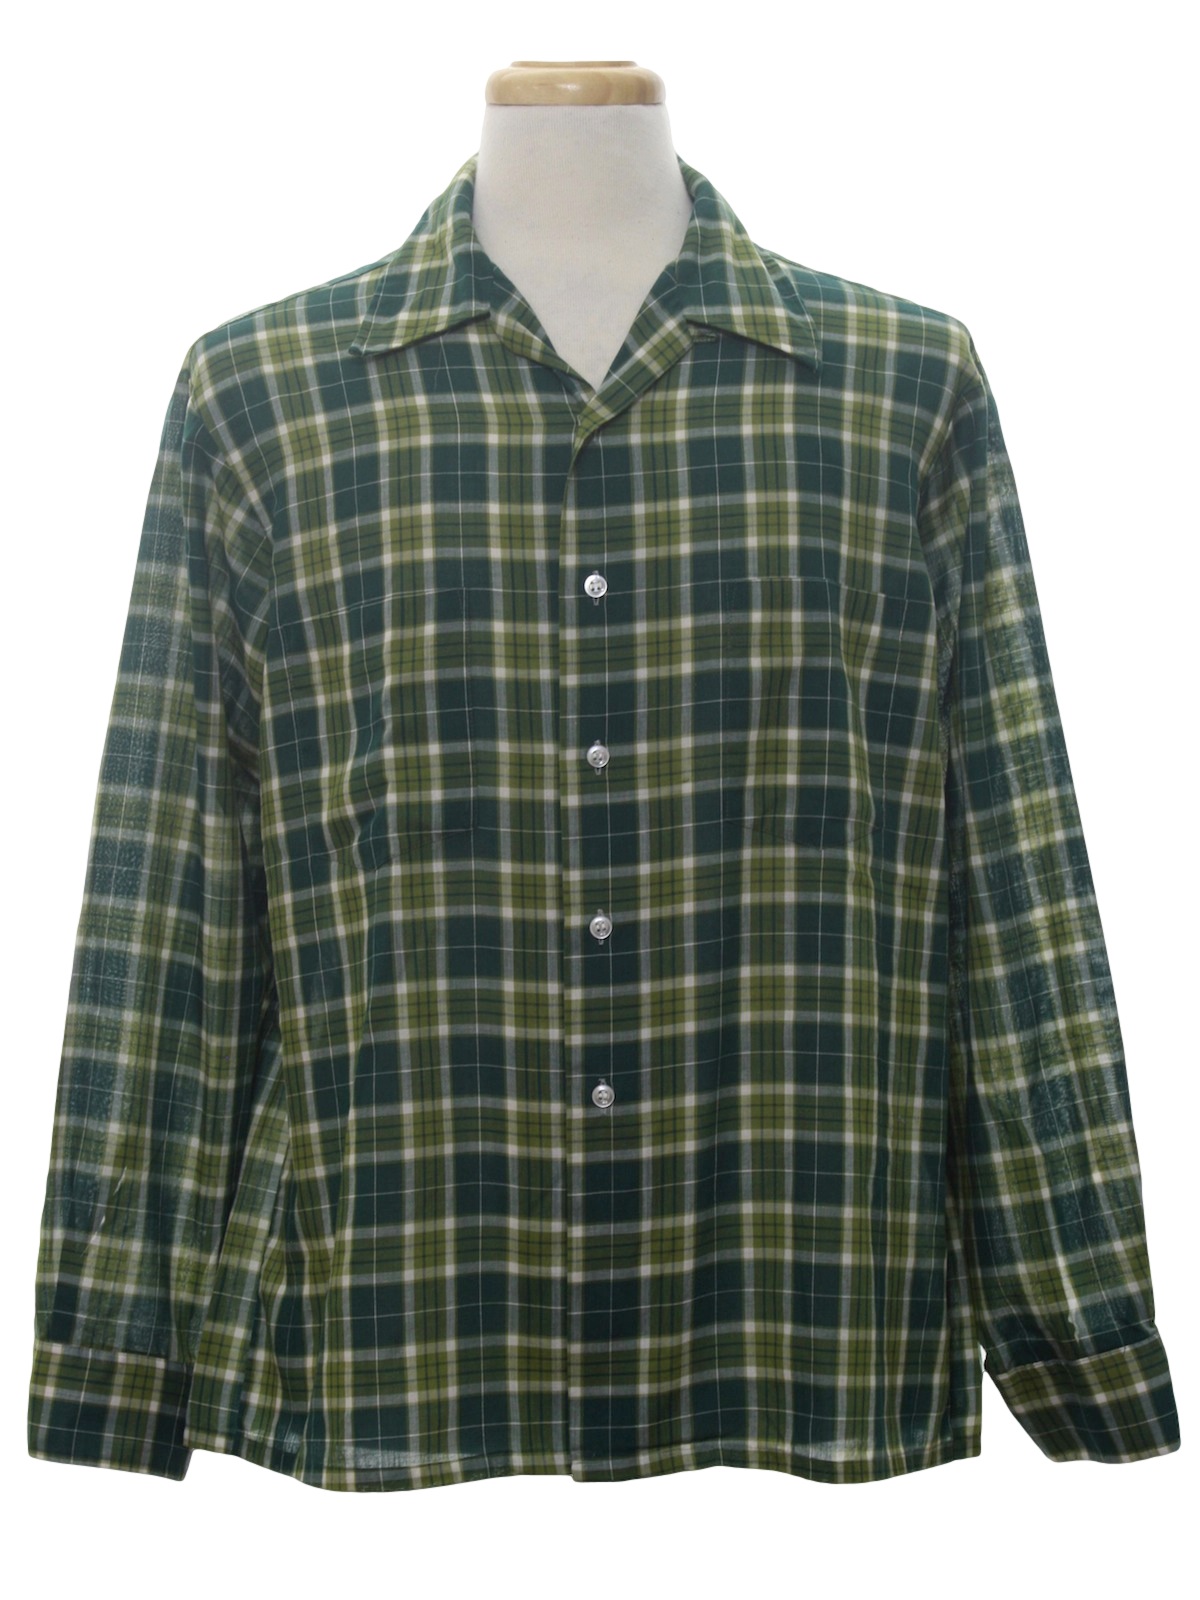 Fifties Vintage Shirt: Late 50s -towncraft- Mens shaded green and white ...